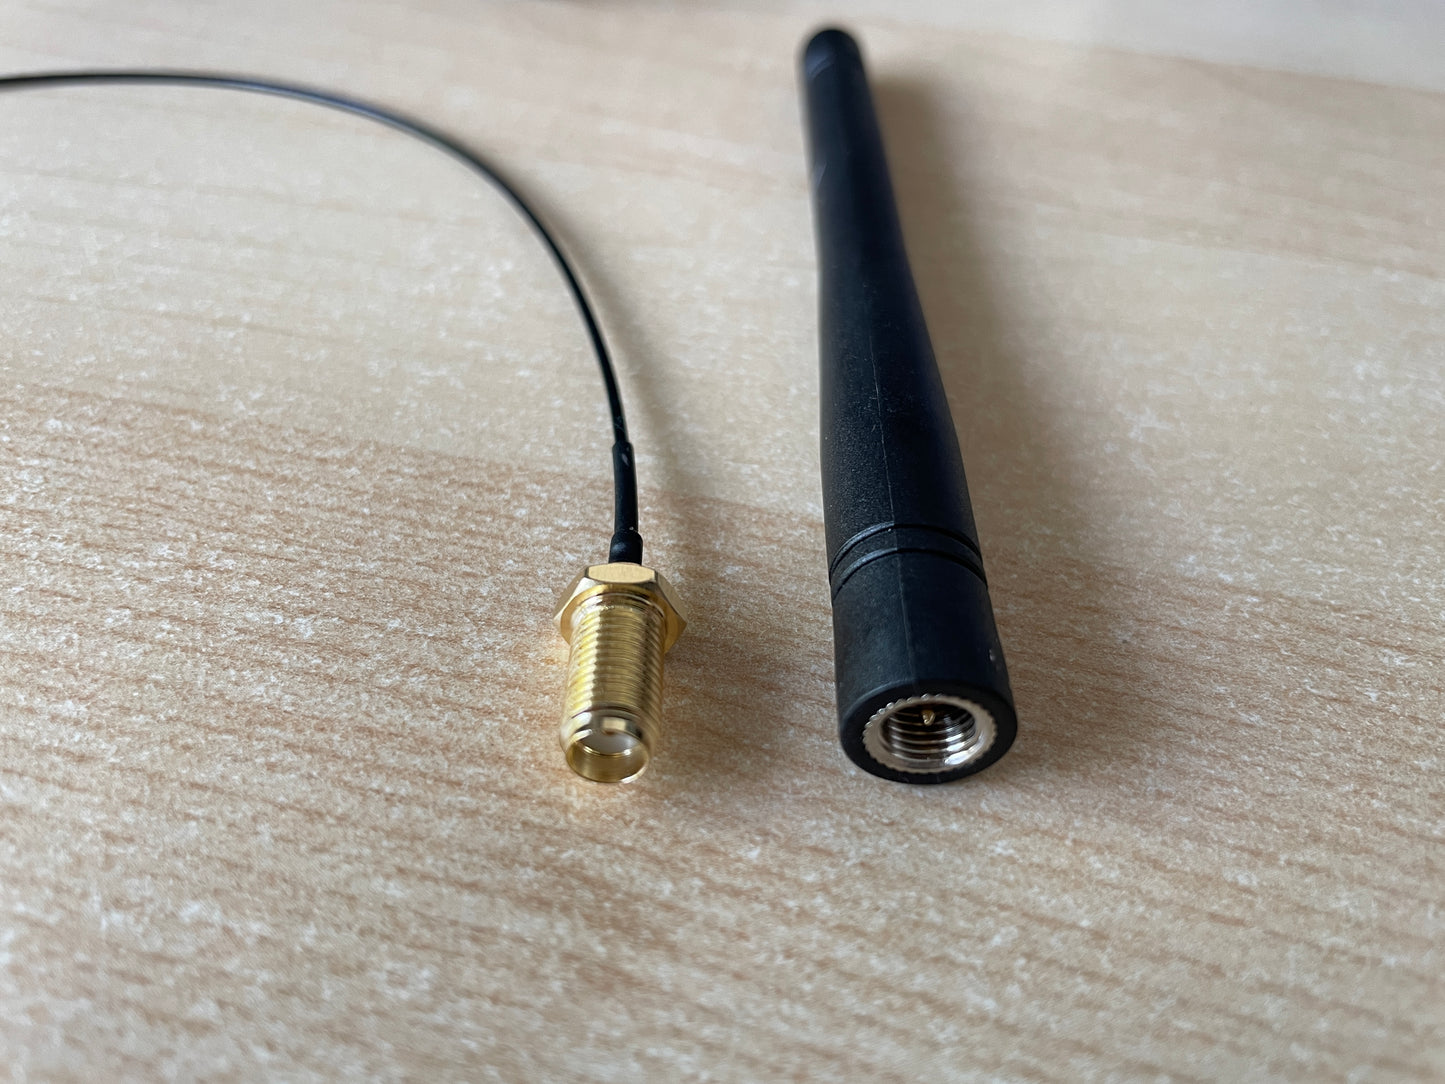 915Mhz 3dbi antenna (105mm straight) - SMA Male with u.fl to SMA Female pigtail extension